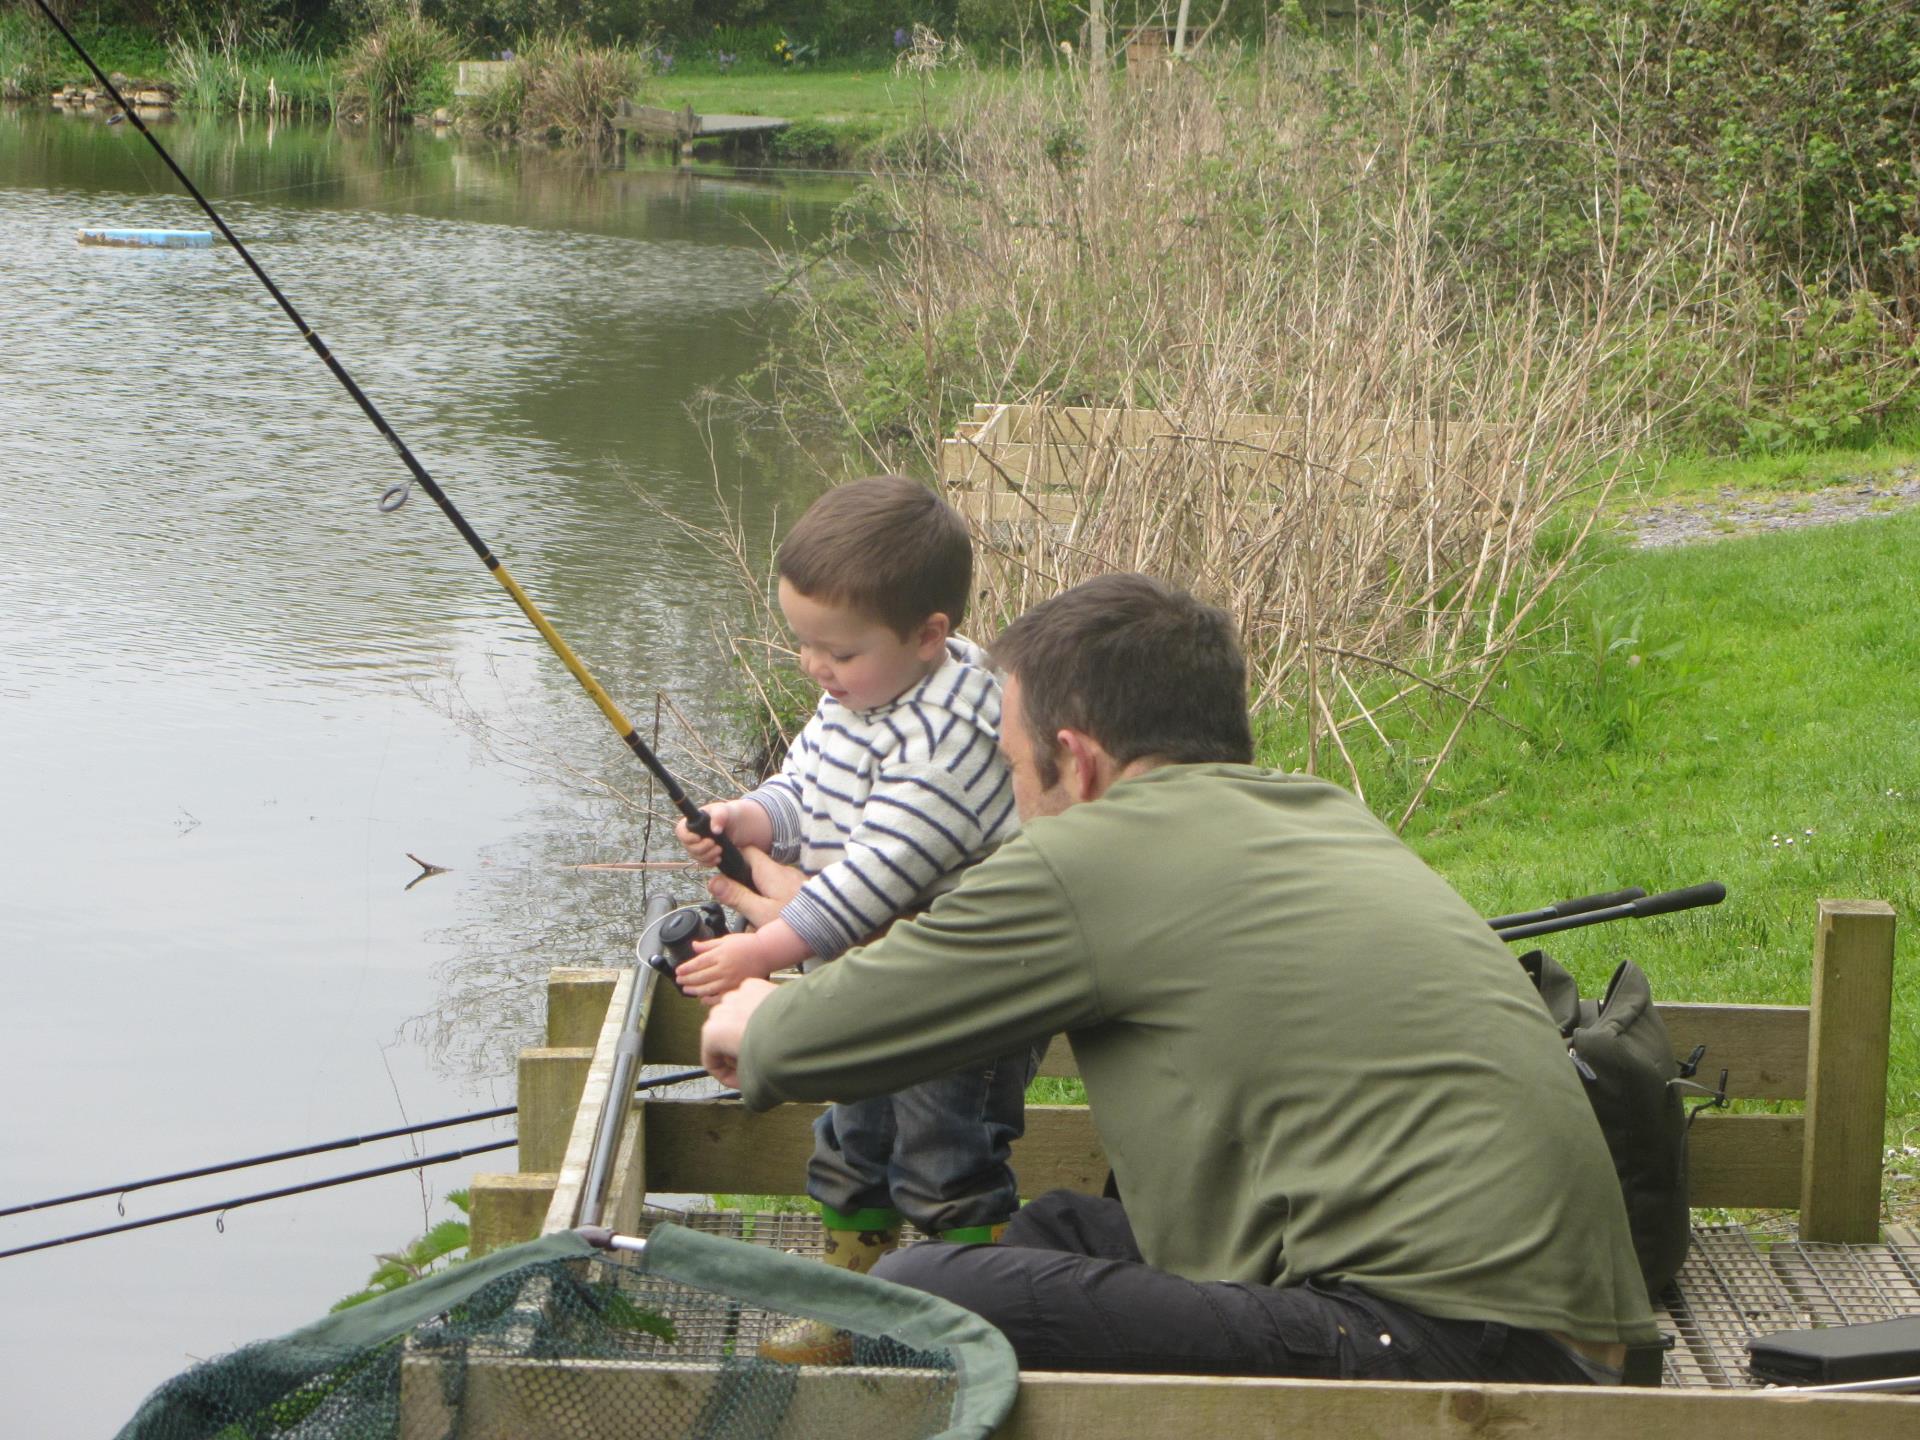  Never too young to fish